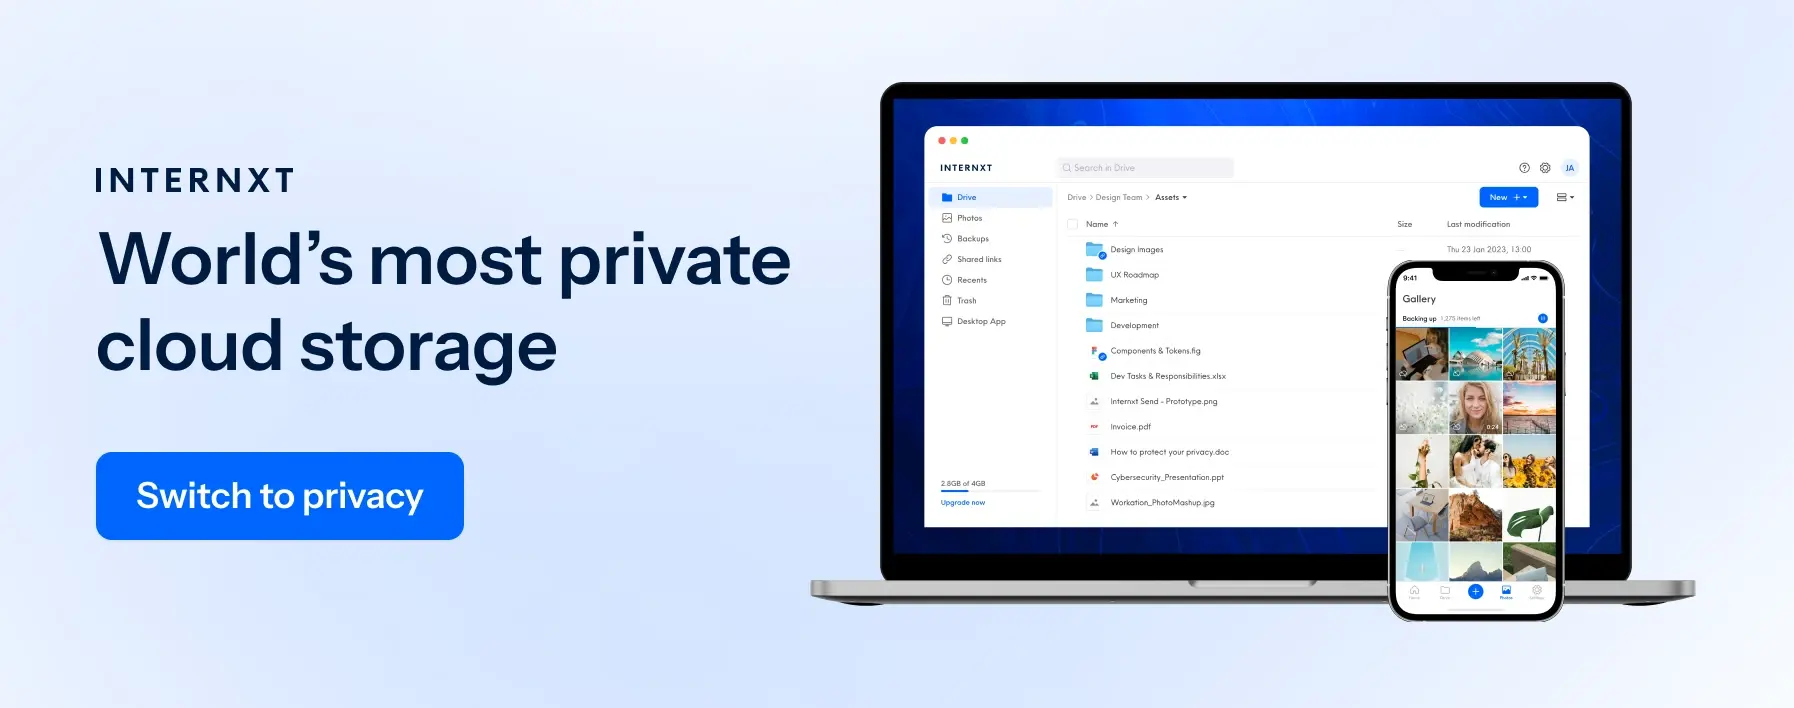 Internxt is a cloud storage service based on encryption and privacy.